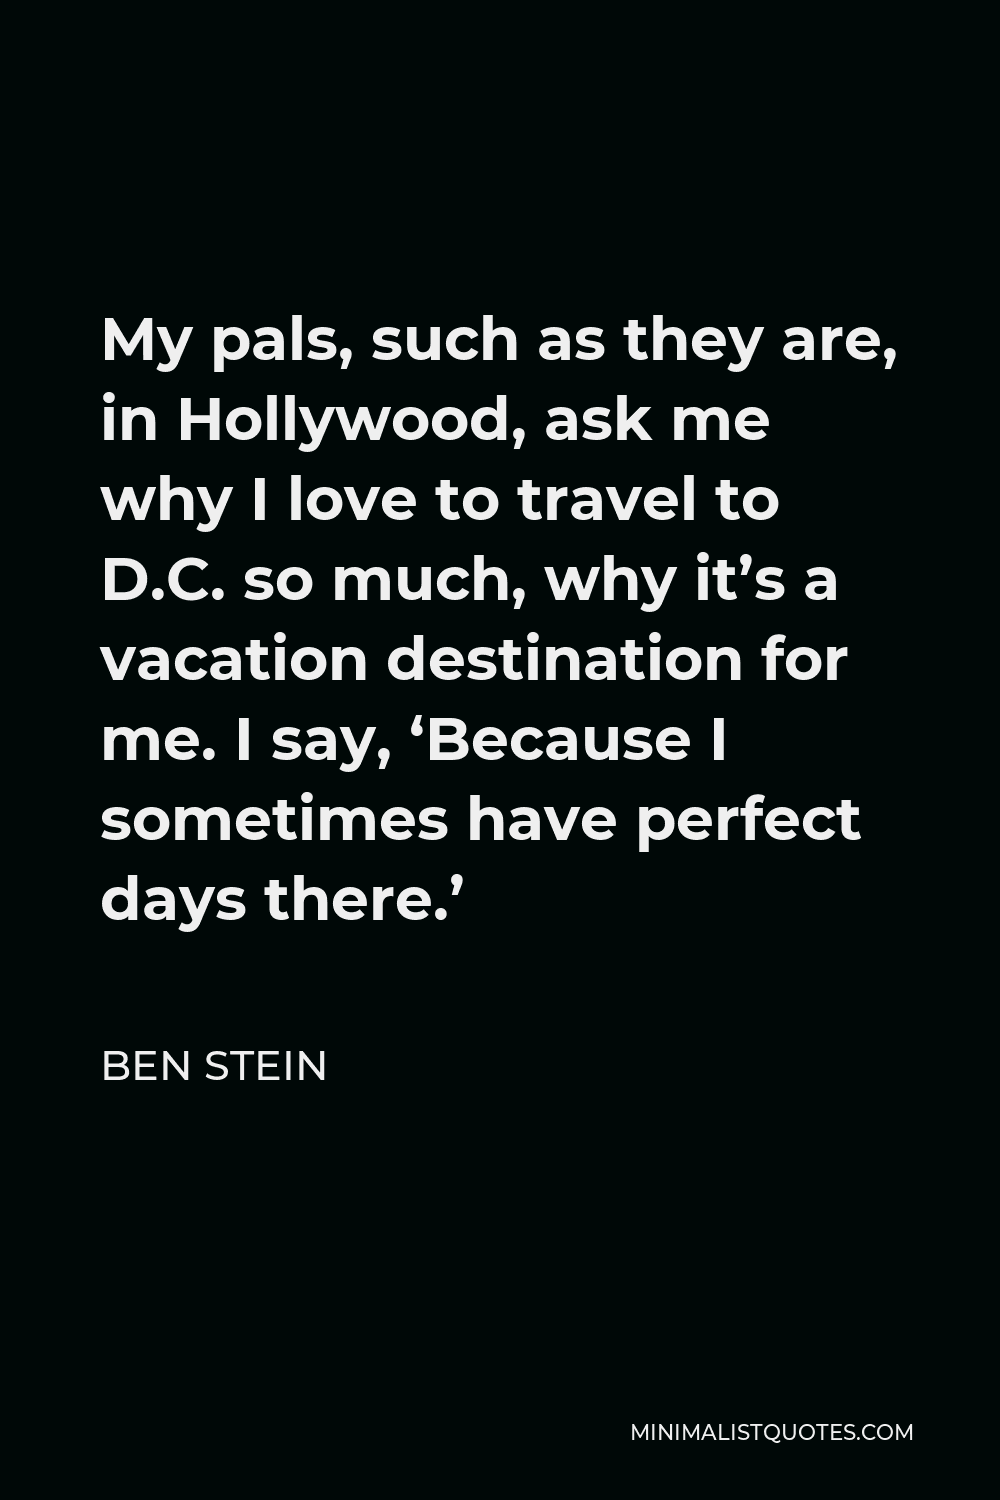 Ben Stein Quote - My pals, such as they are, in Hollywood, ask me why I love to travel to D.C. so much, why it’s a vacation destination for me. I say, ‘Because I sometimes have perfect days there.’